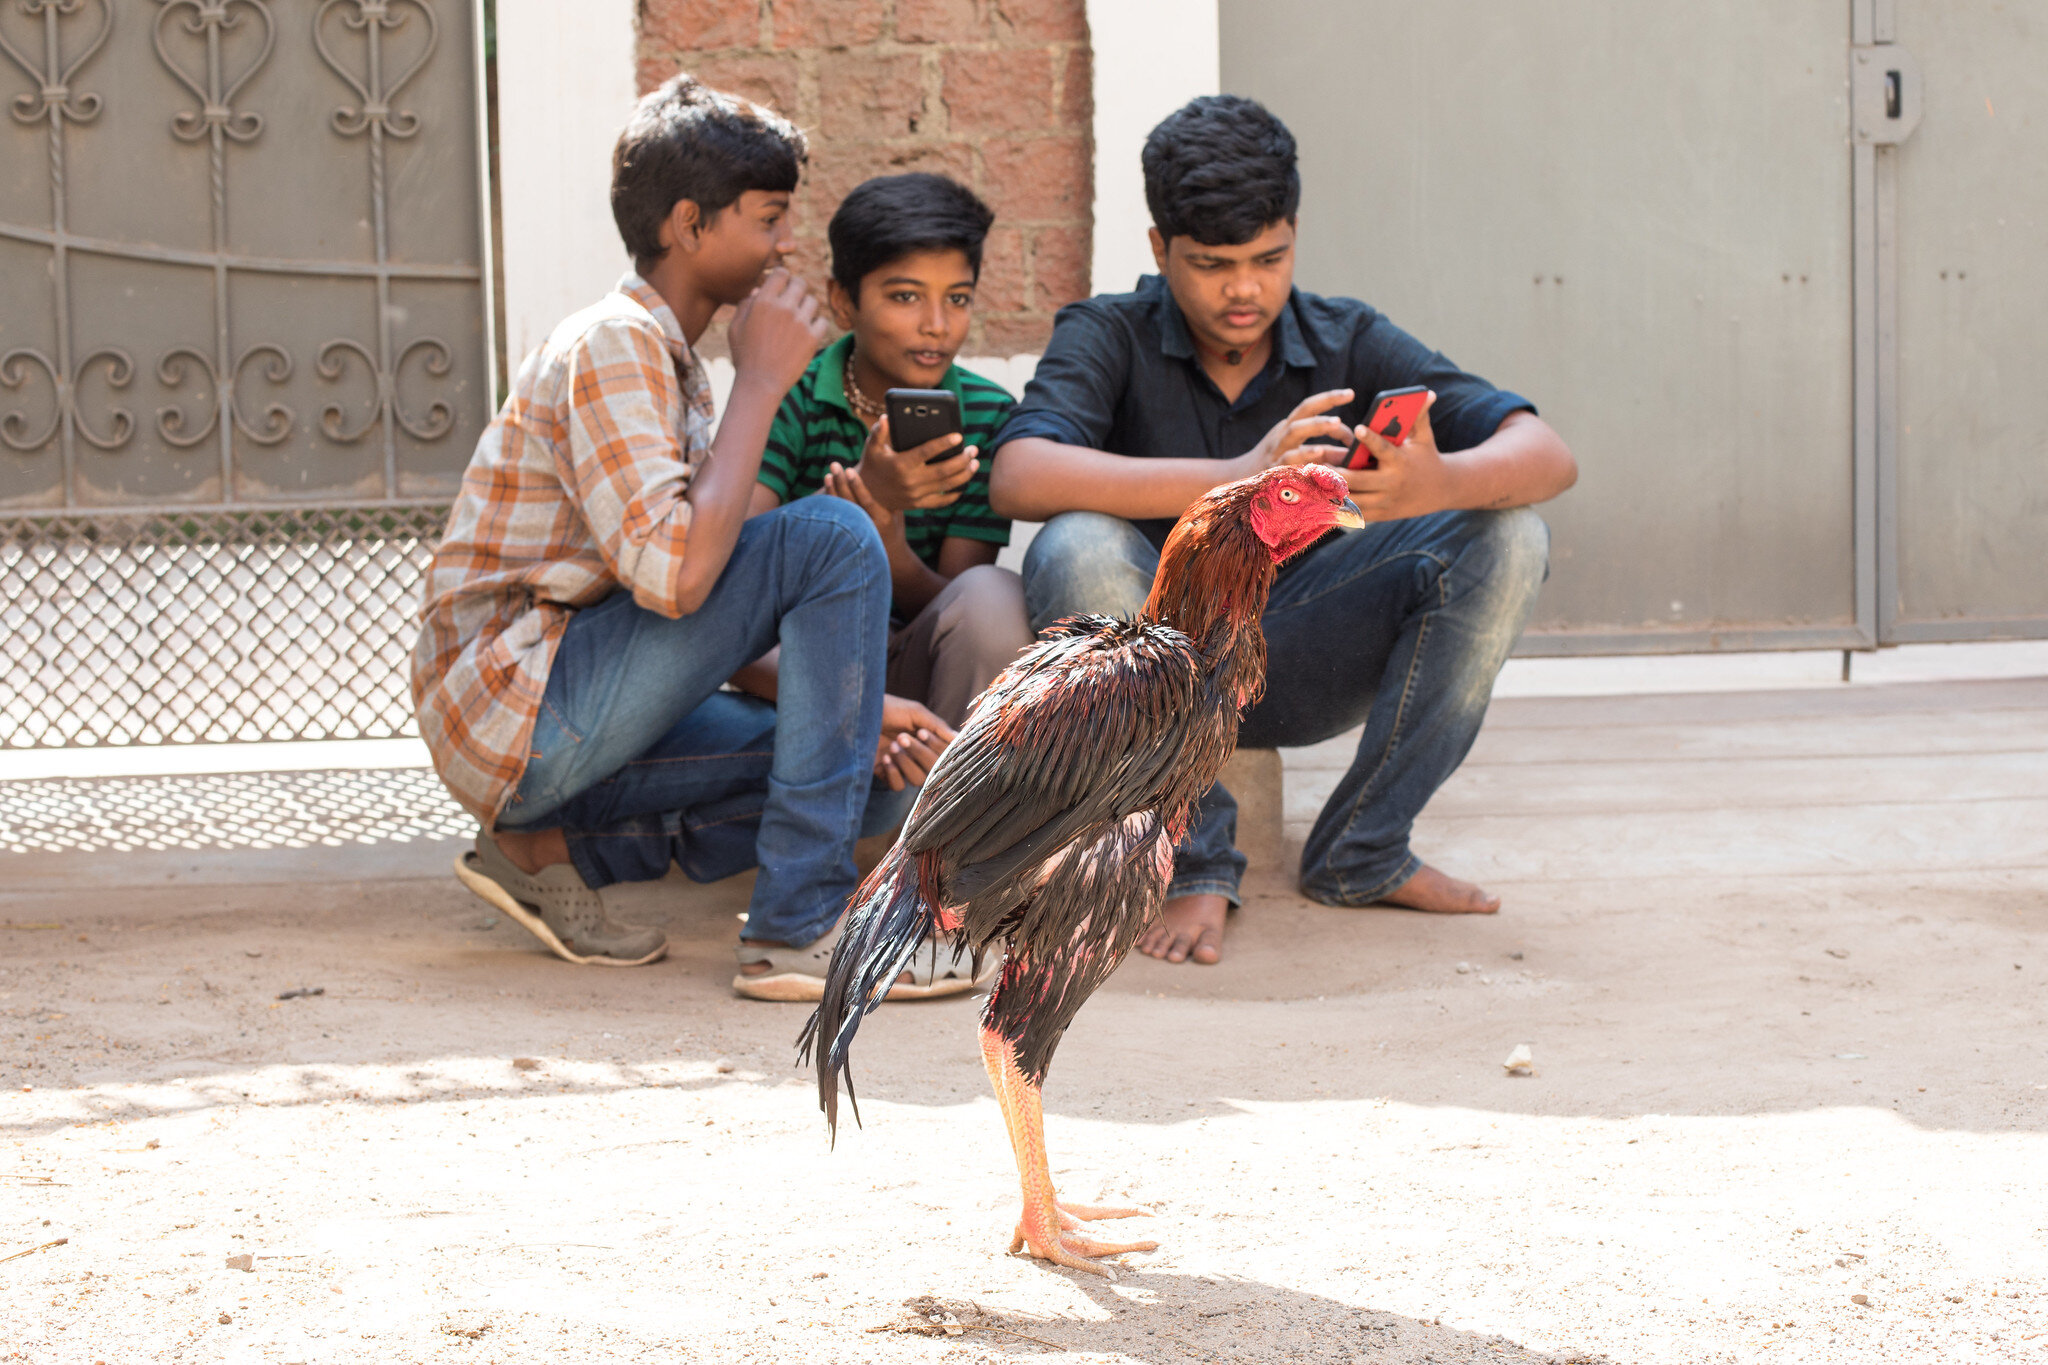 Street photographs often evoke an emotion such as humour in this image of children on their mobile phones behind a large chicken on the streets of Madurai.